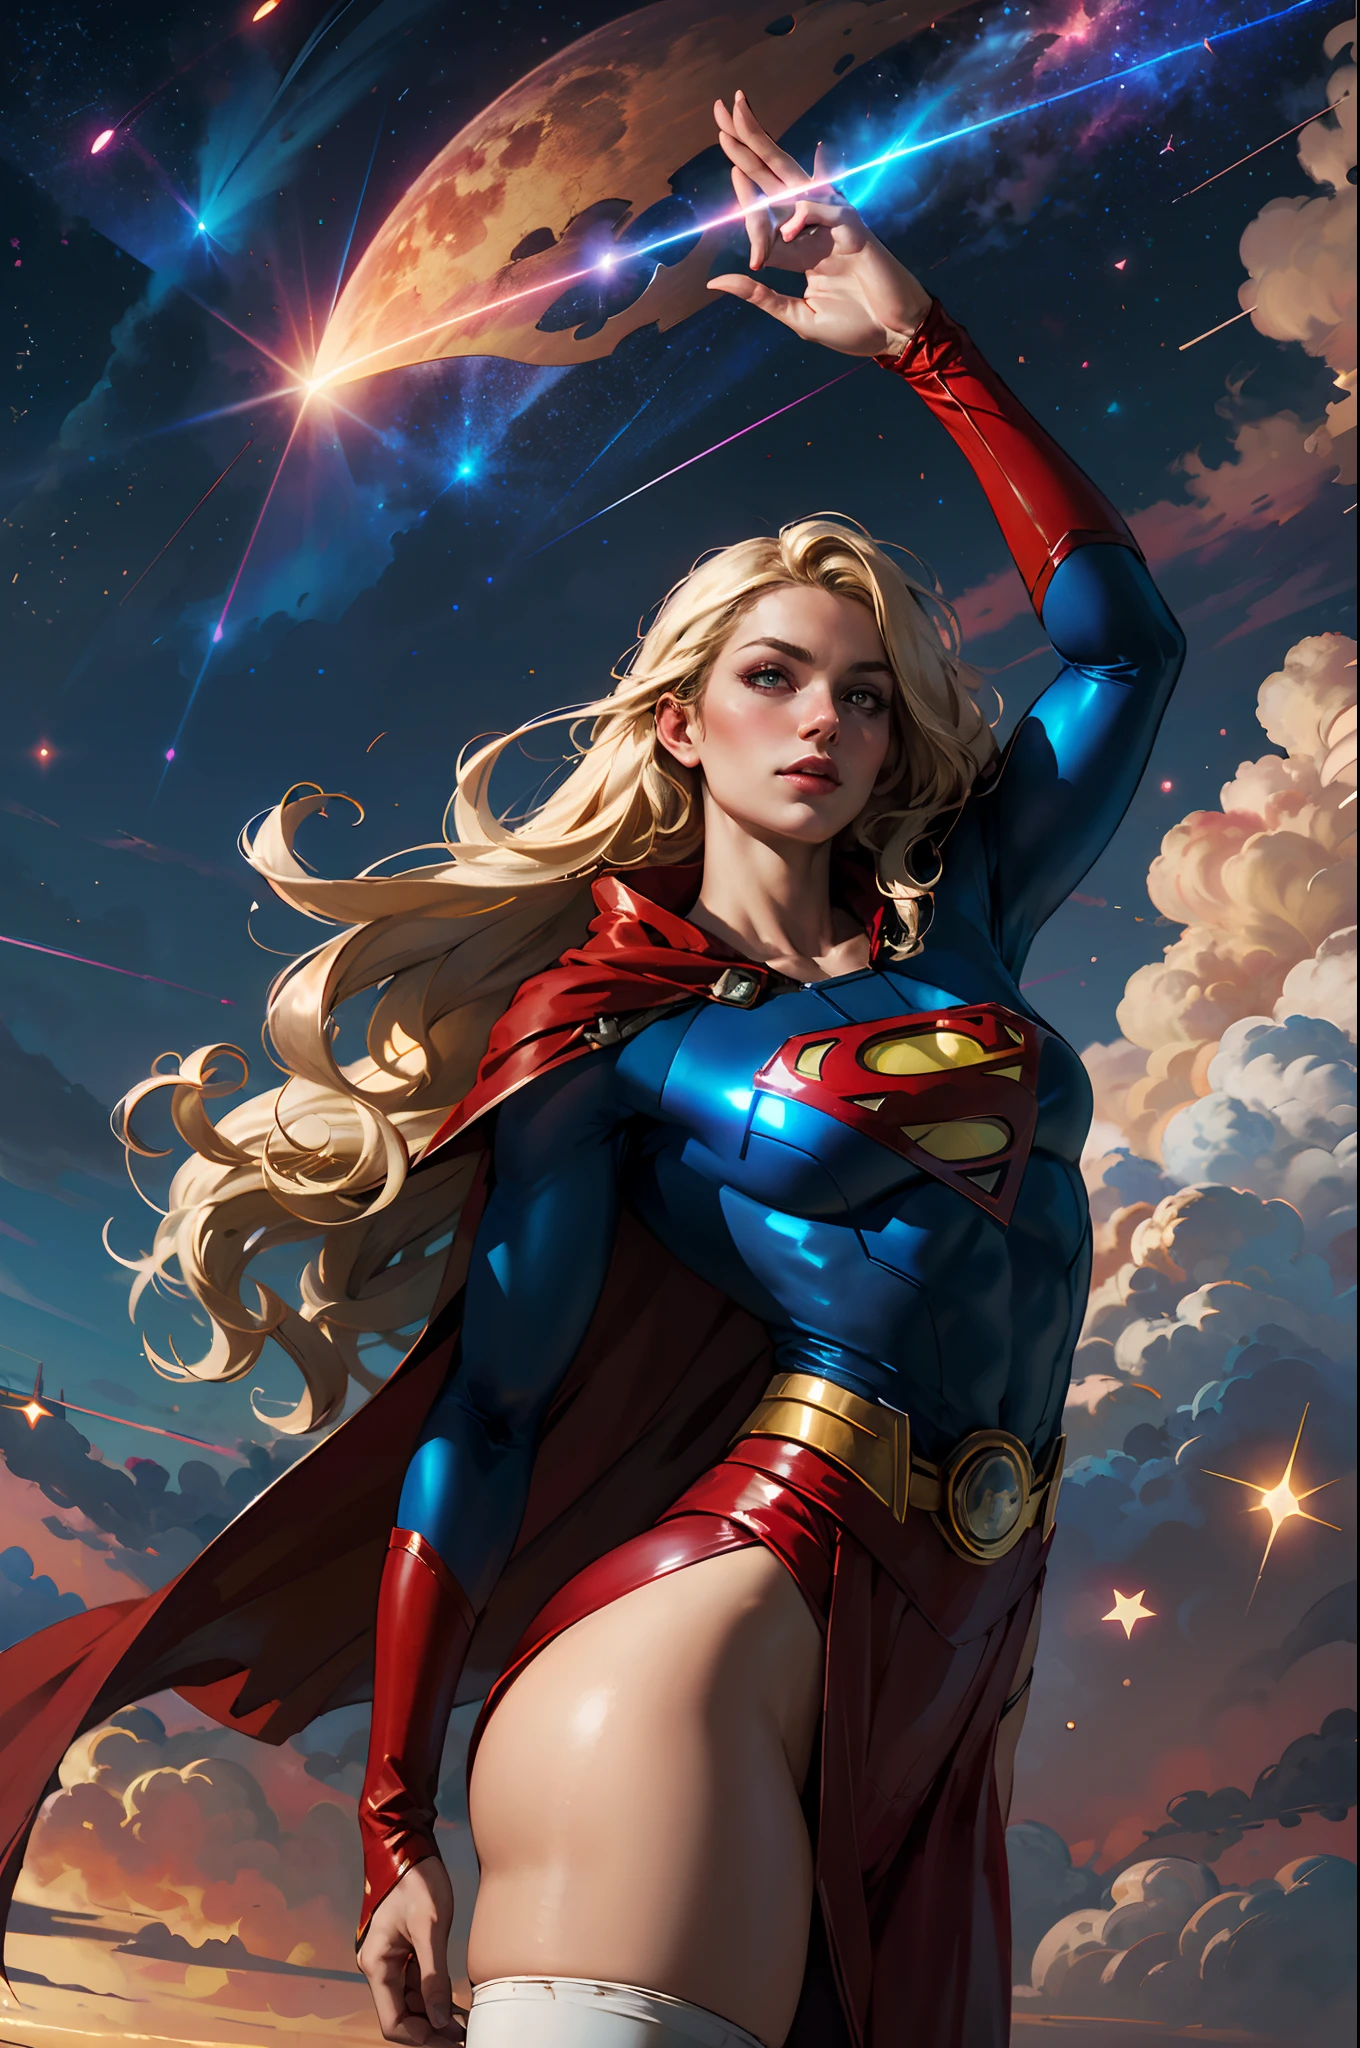 nijistyle, Cowboy shot of beautiful woman in Superman costume, Long Blonde Hair, Heroic, Glowing red eyes, laser eyes, Cape, Particle, Clouds, skyporn, Red skirt, Red boots, Sexy Pose, large udder, nigh sky, Countless stars, Stick one hand up, Flying Pose,